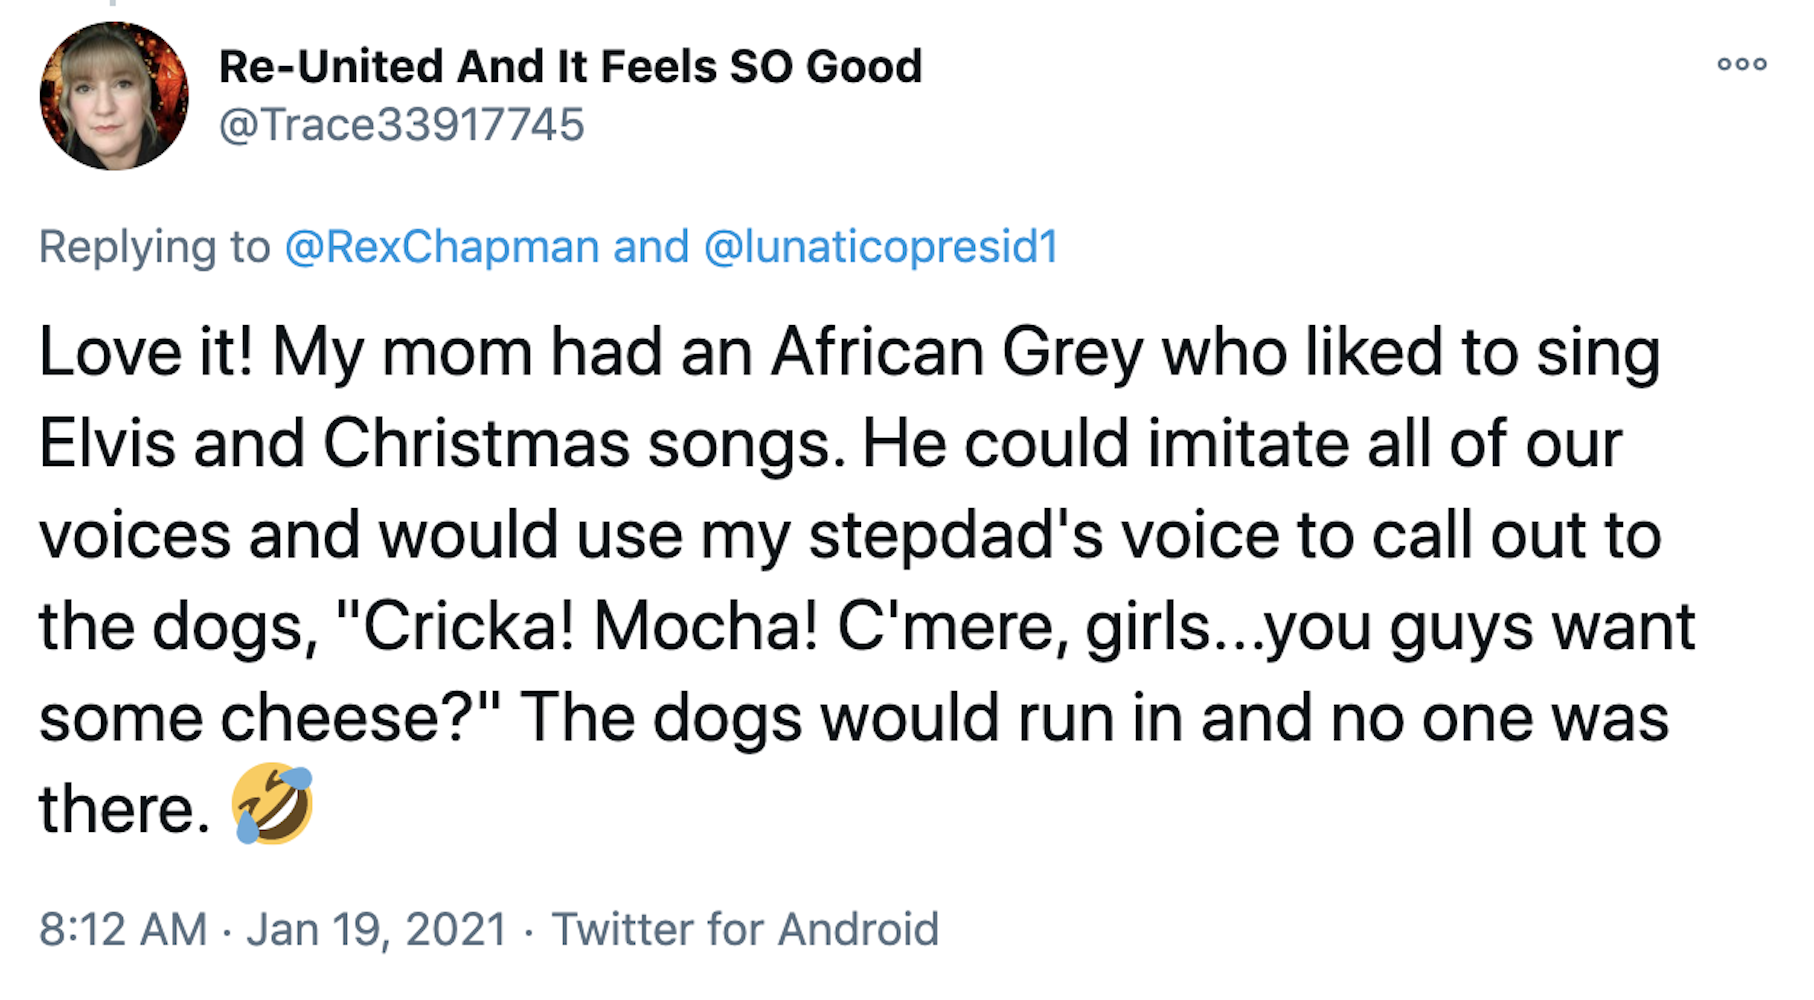 Love it! My mom had an African Grey who liked to sing Elvis and Christmas songs. He could imitate all of our voices and would use my stepdad's voice to call out to the dogs, "Cricka! Mocha! C'mere, girls...you guys want some cheese?" The dogs would run in and no one was there. 🤣